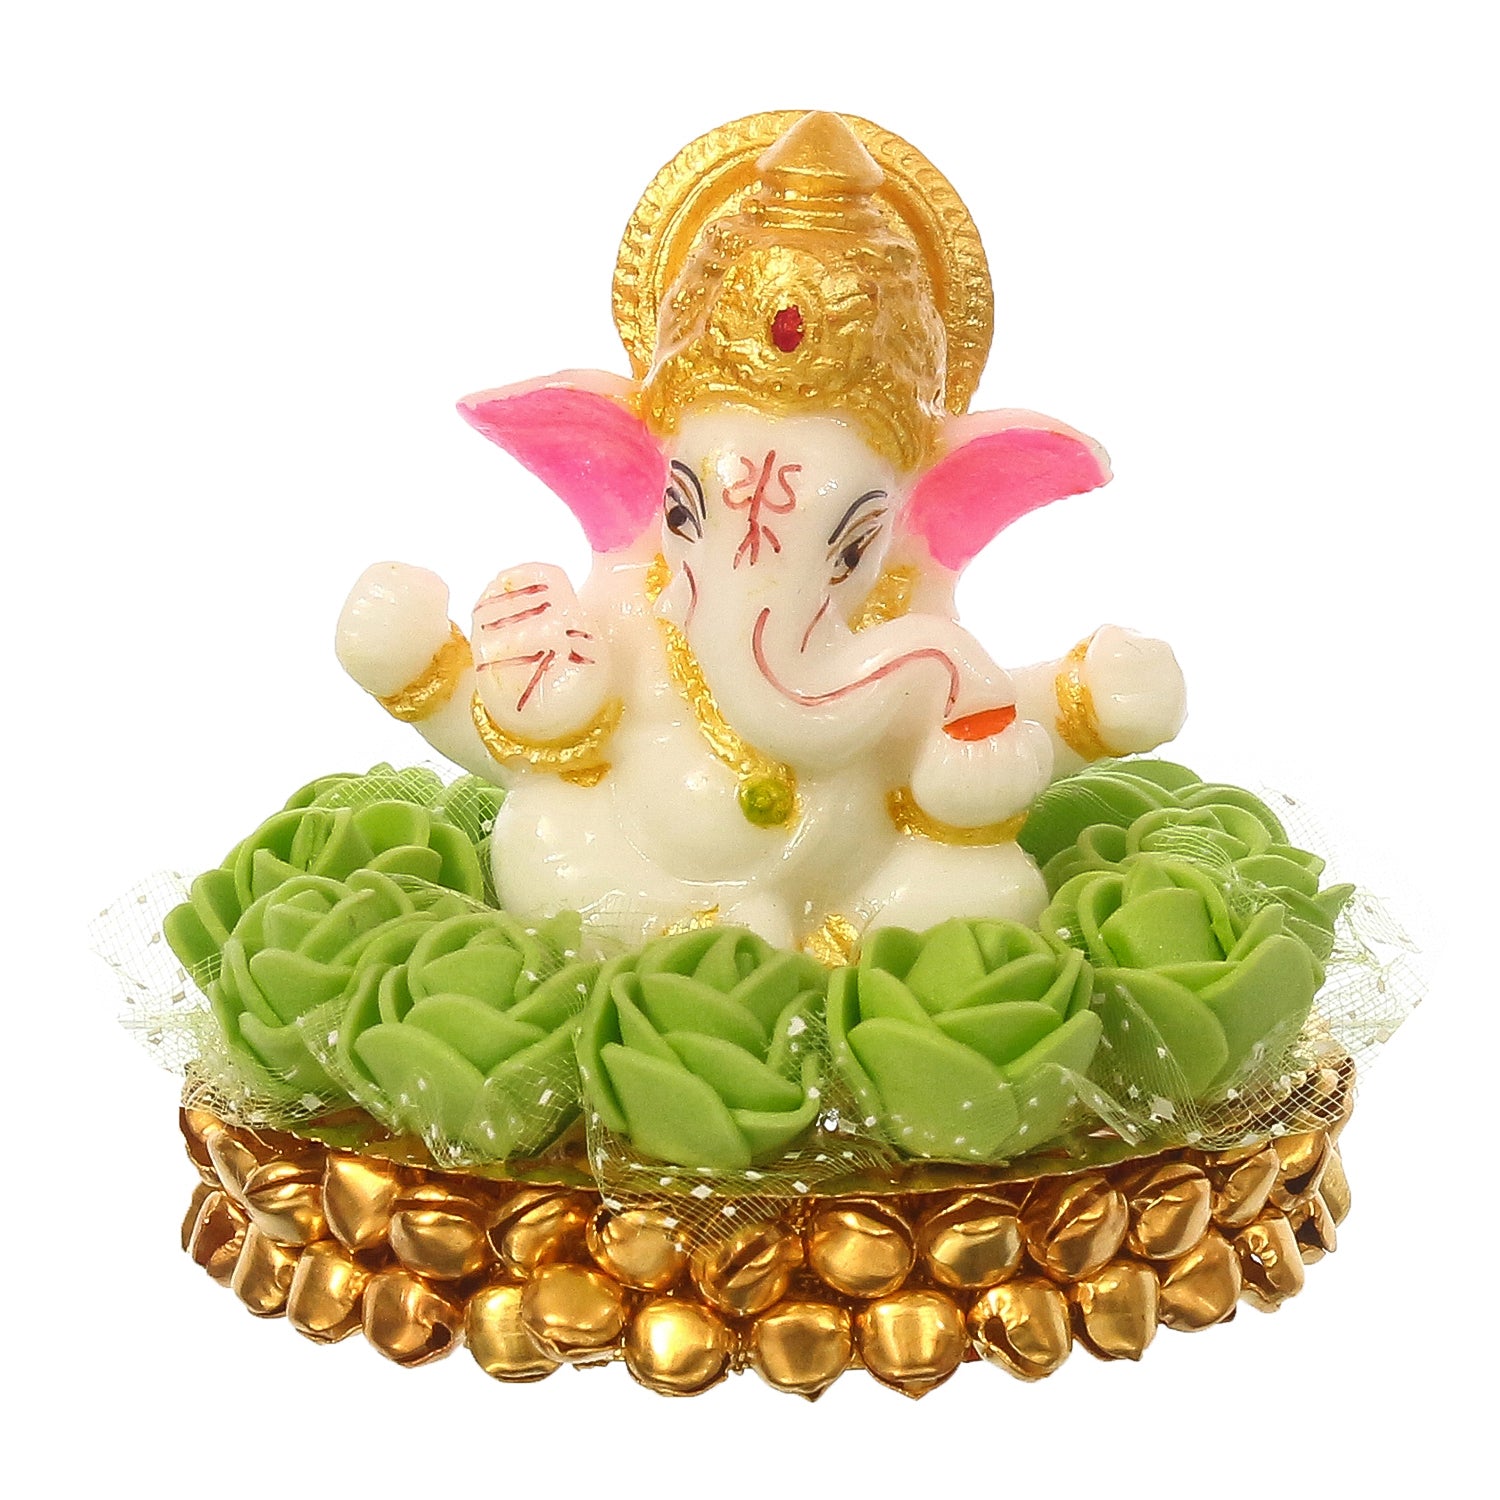 Lord Ganesha Idol on Decorative Handcrafted Plate with Green Flowers 2